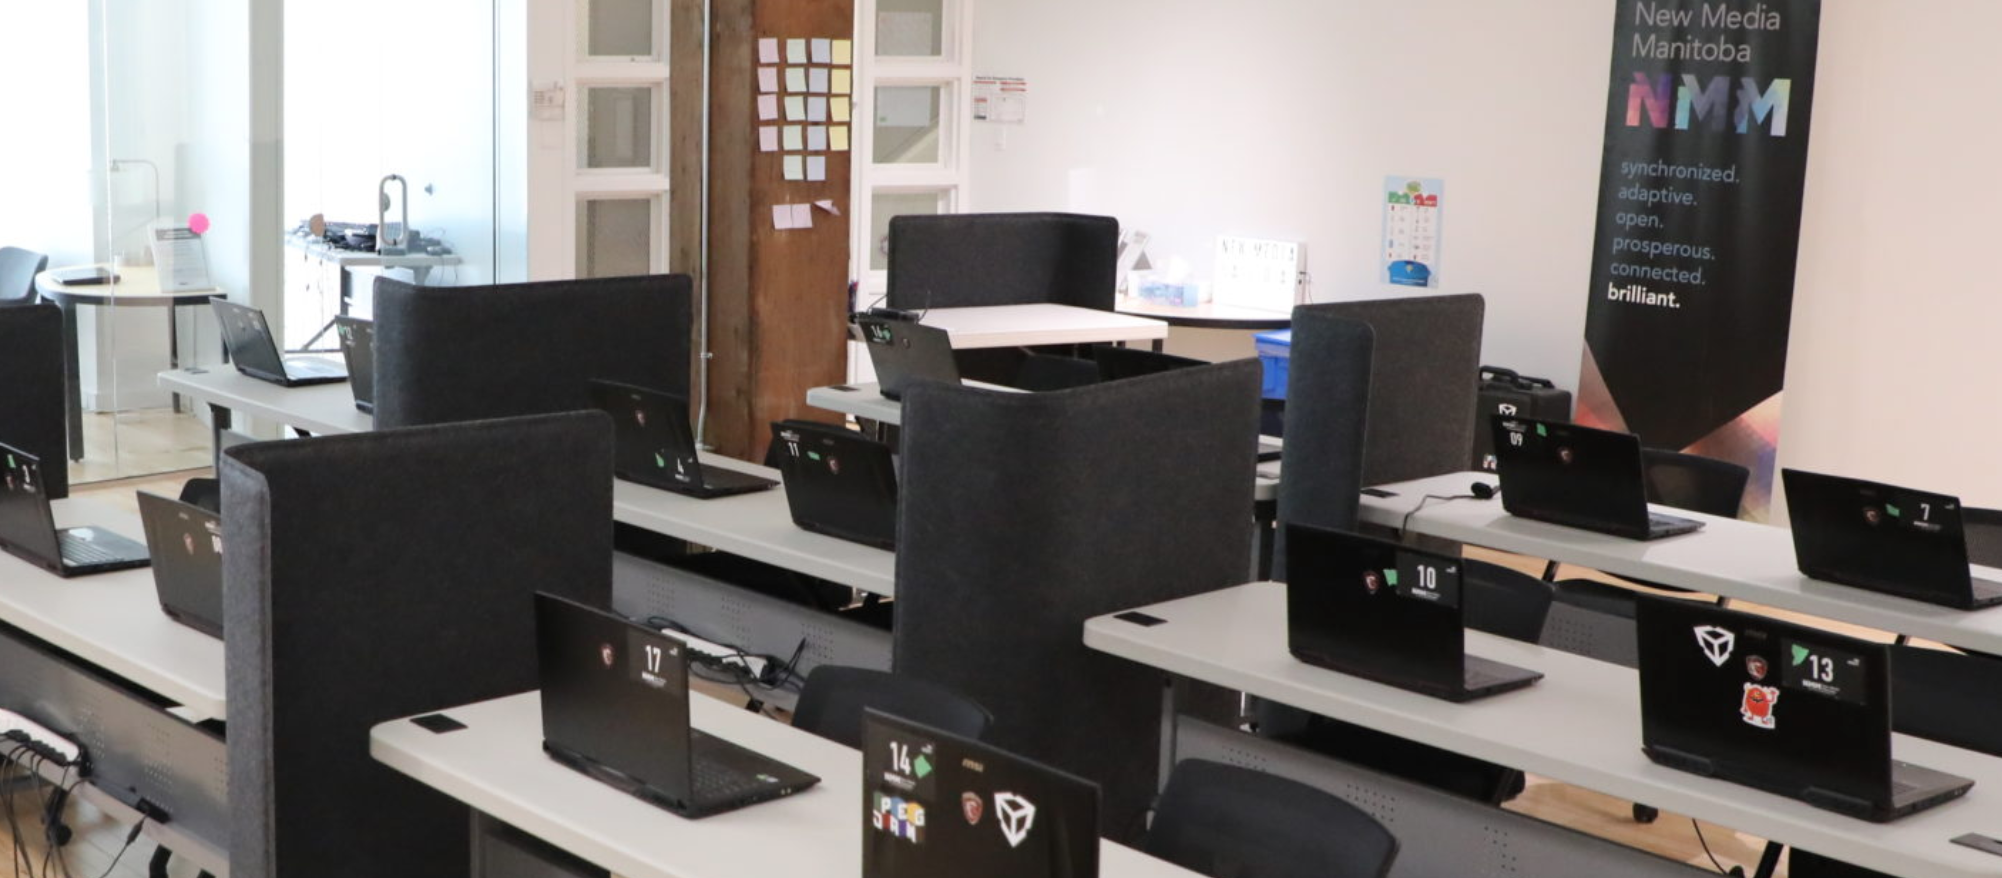 NMM Classroom of computer work stations at 62 Albert.